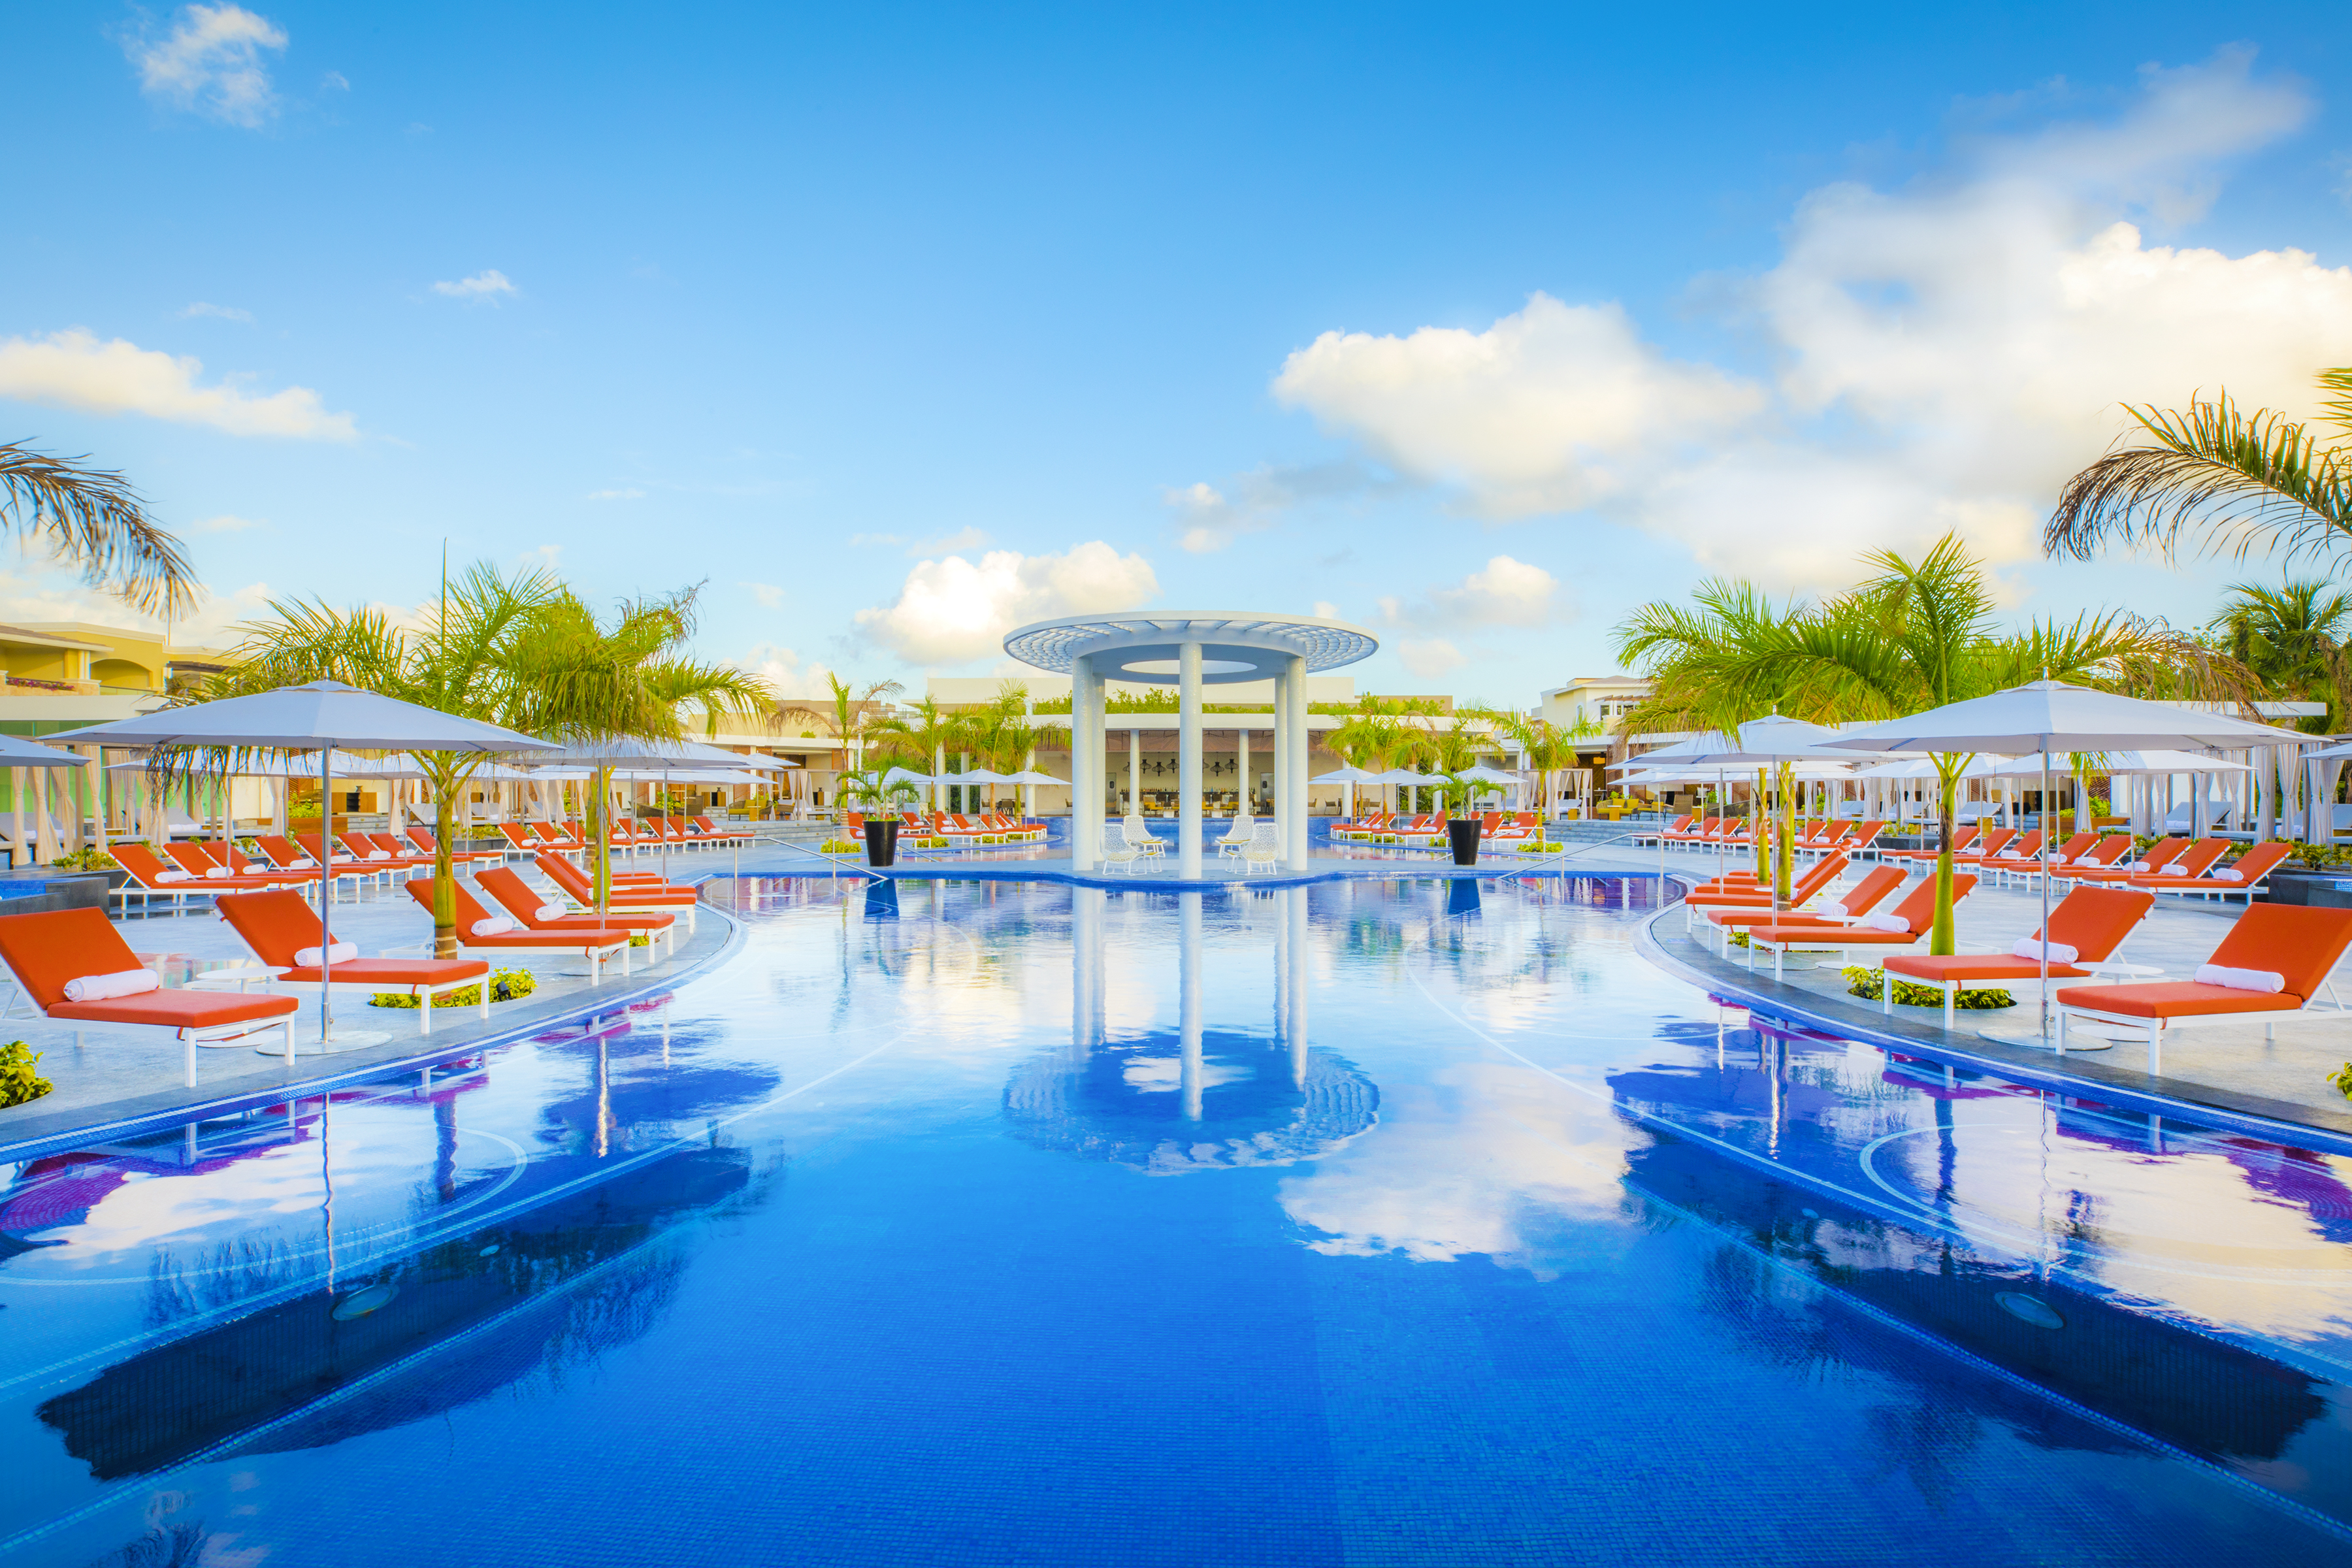 Signature Over The Moon in Cancun - TravelPress